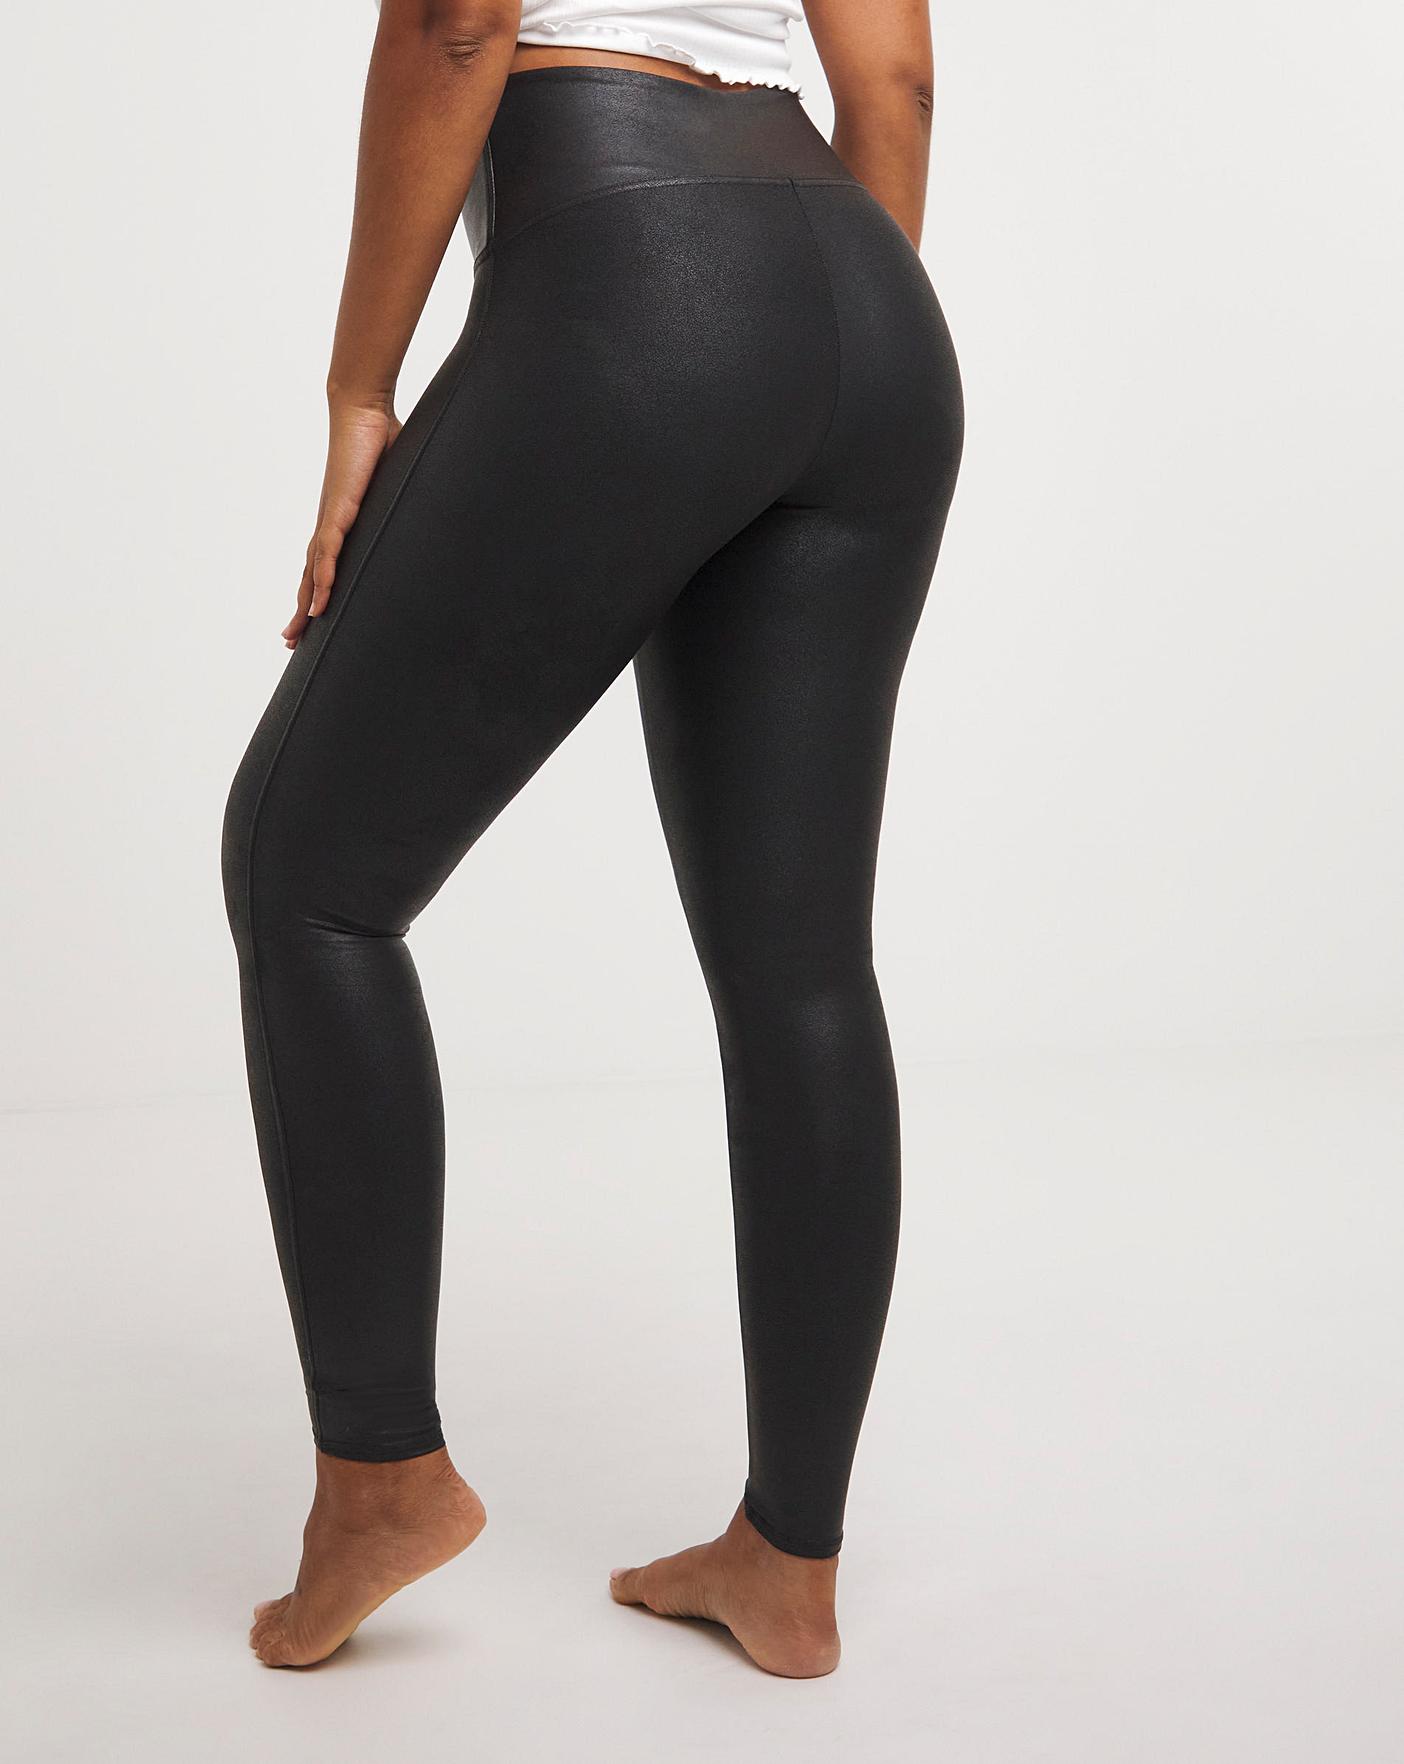 Petite Spanx Faux Leather Leggings – Mays Street Boutique